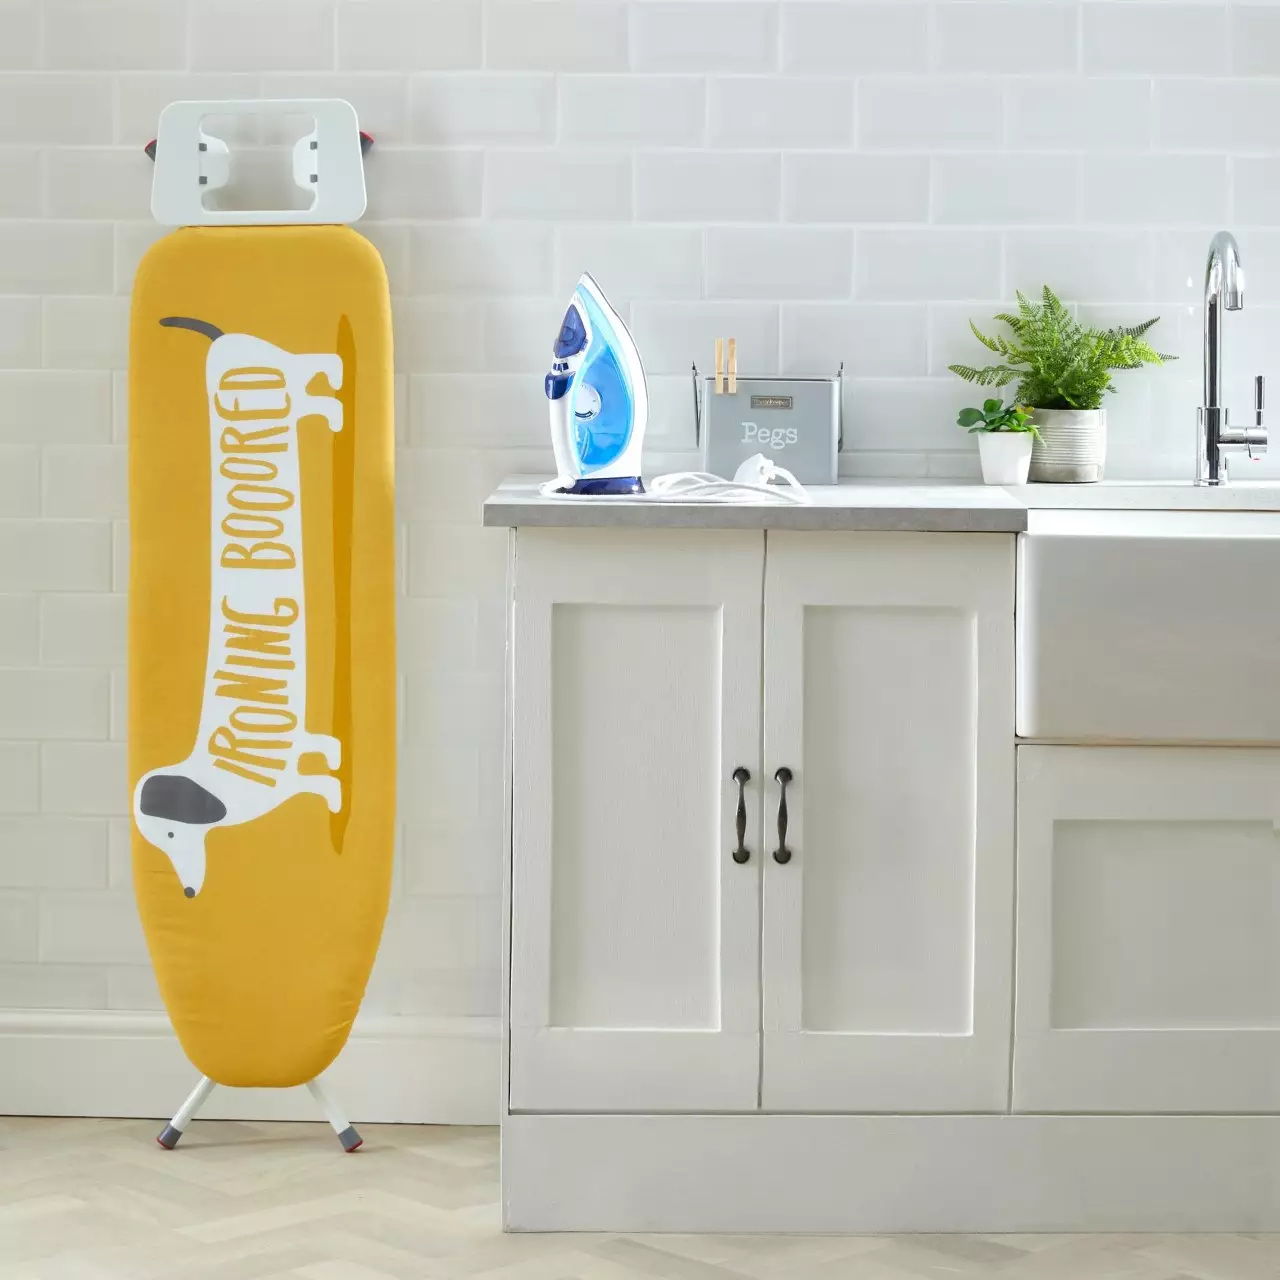 You'll need this adorable ironing board cover (